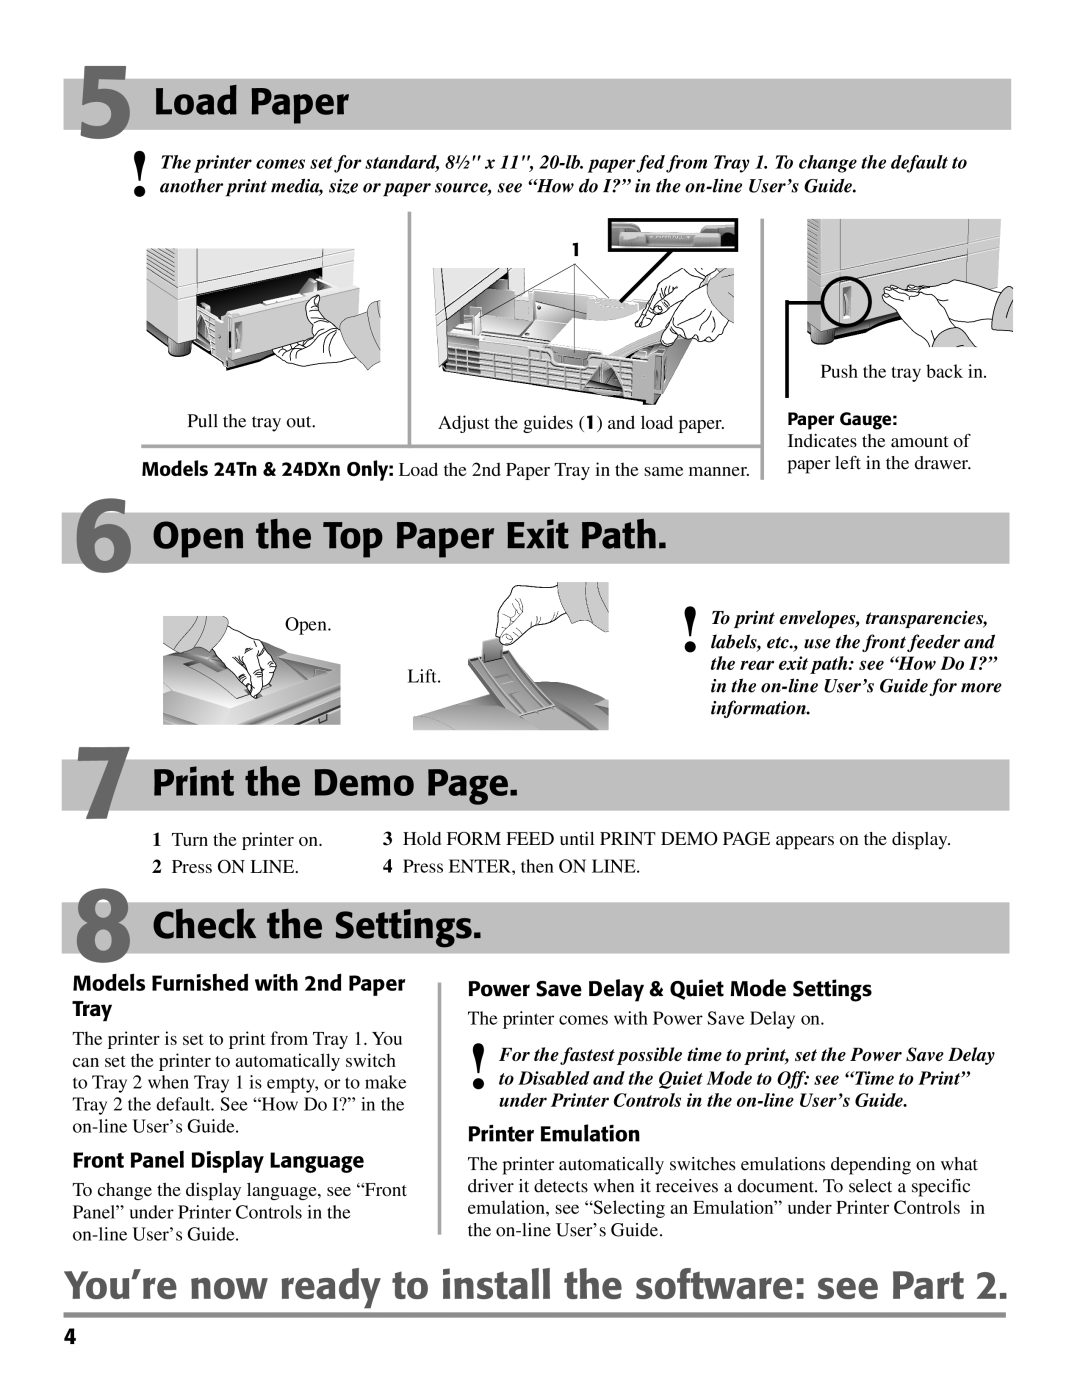 Oki PAGE 24 quick start Load Paper, Open the Top Paper Exit Path, Print the Demo, Check the Settings 